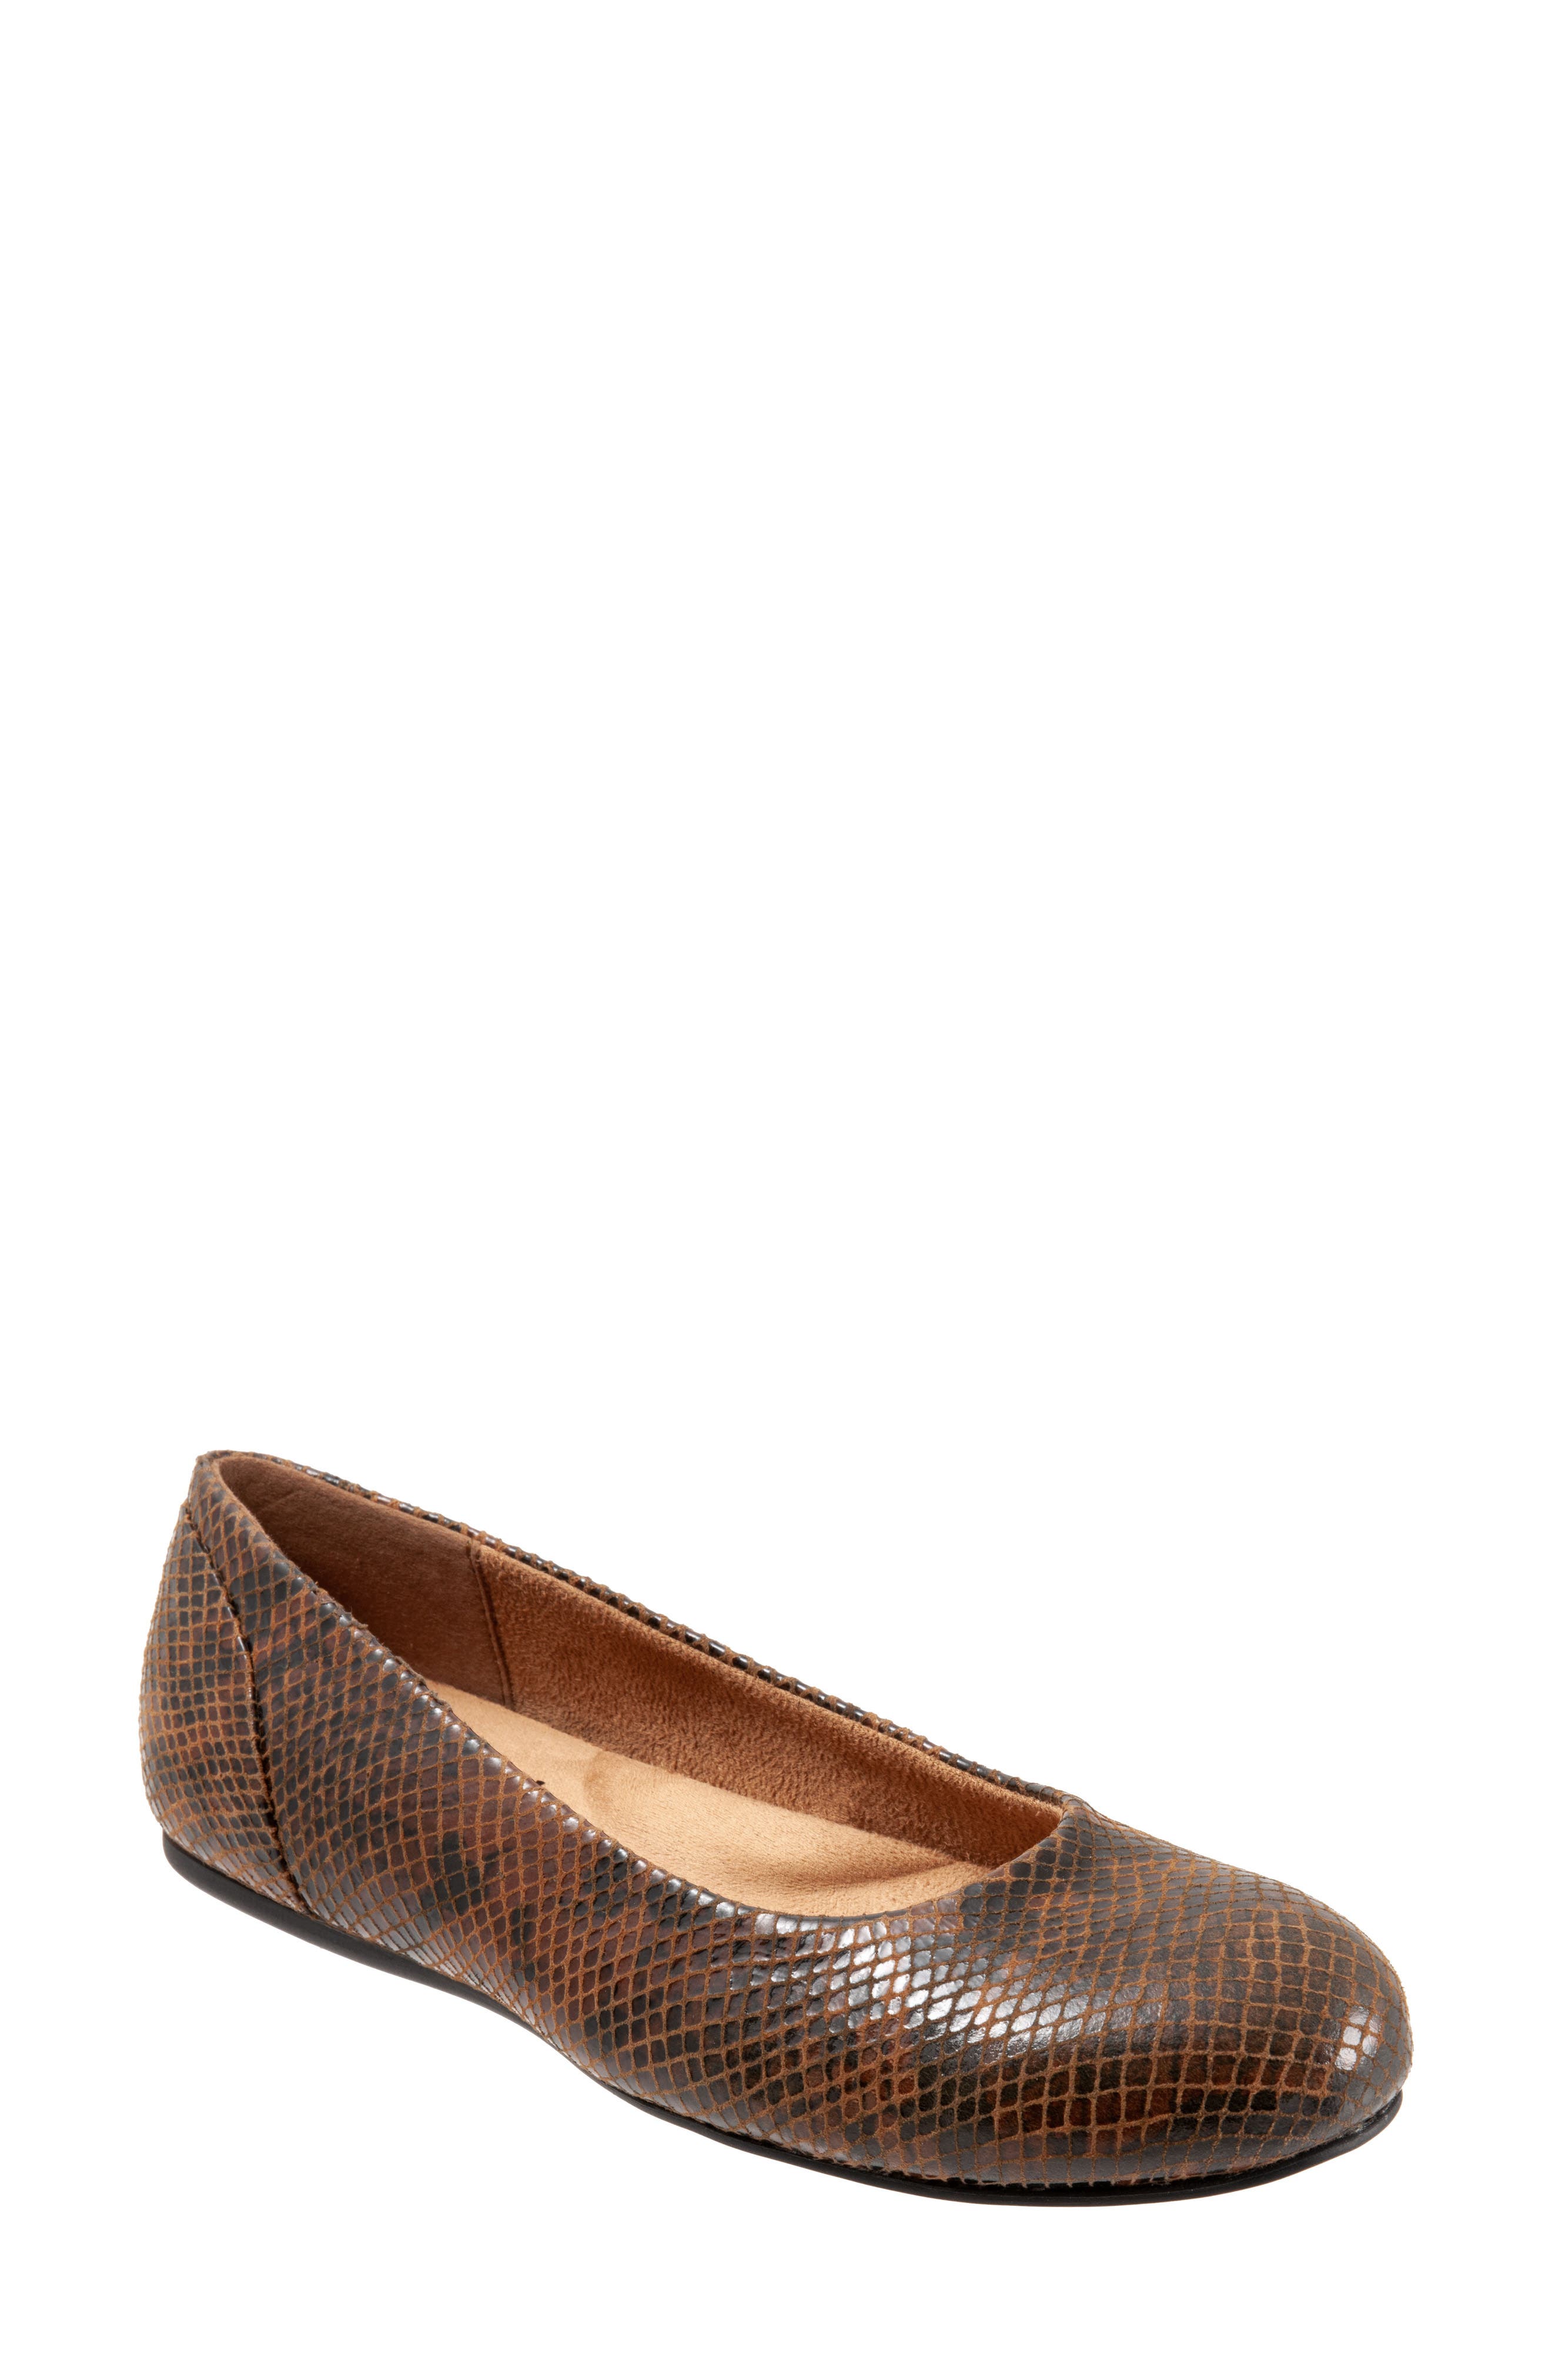 nordstrom womens shoes wide width